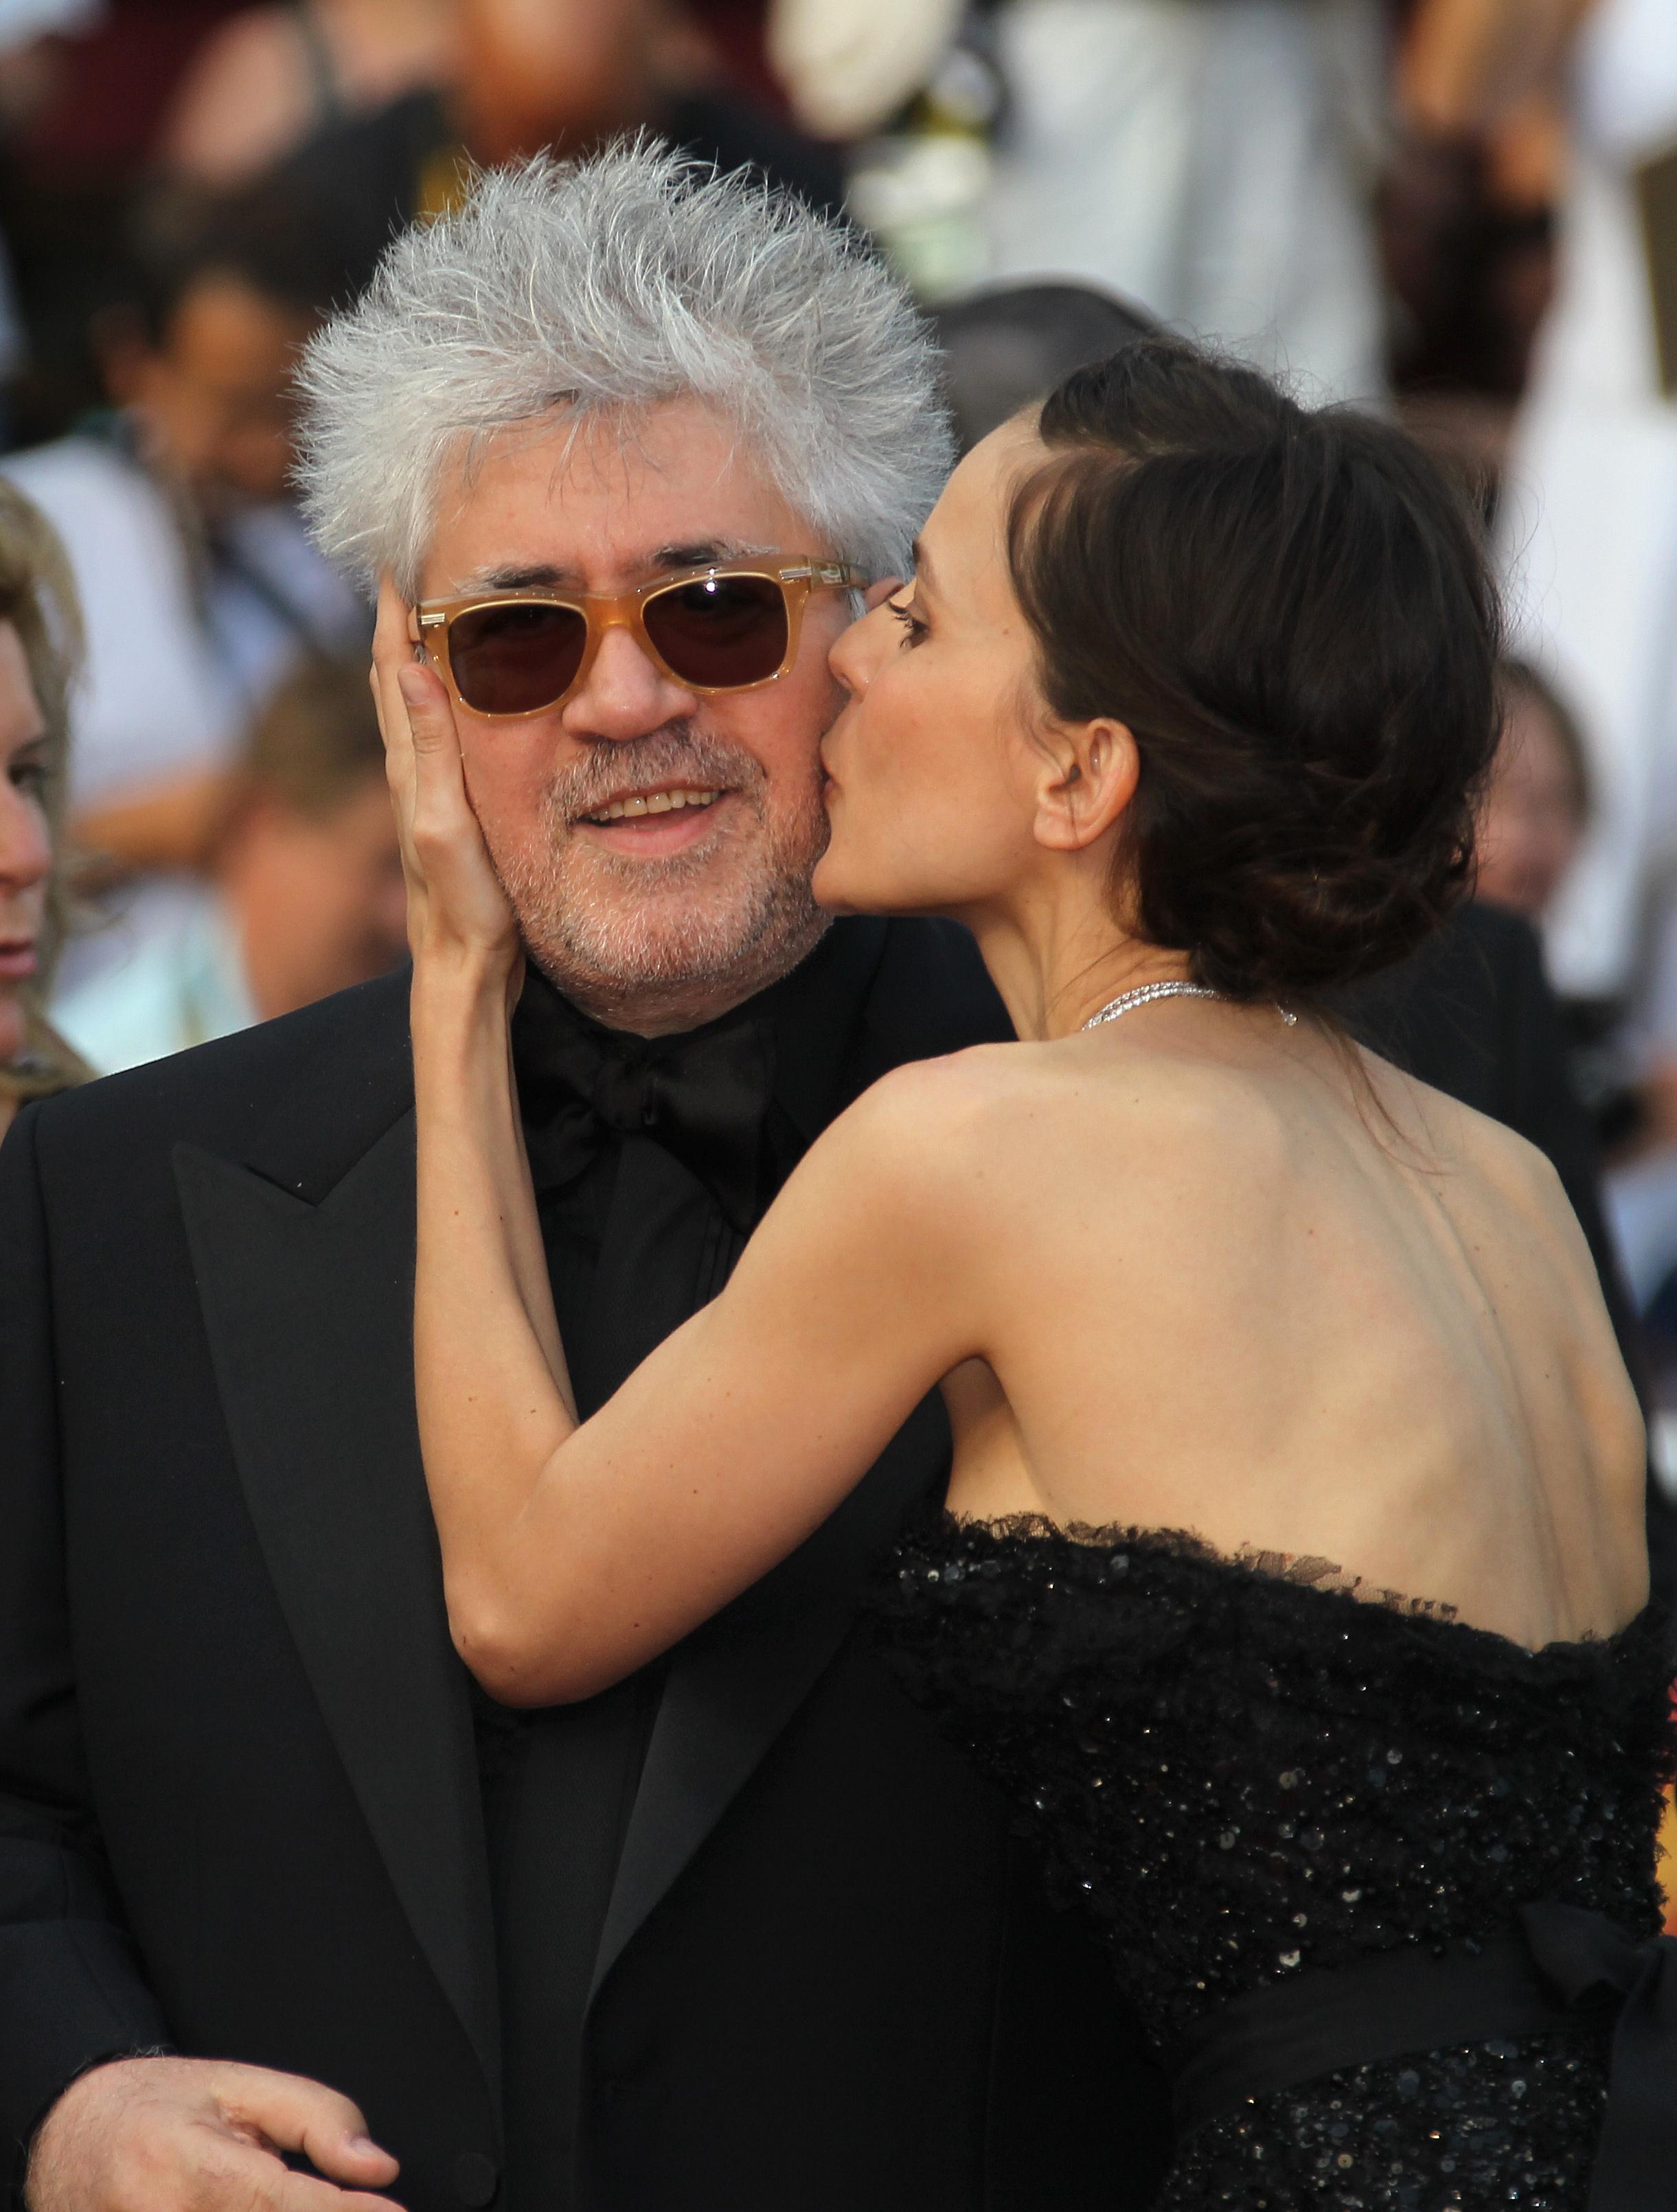 Elena Anaya kisses Pedro Almodovar before a screening of The Skin I Live In at Cannes in May.